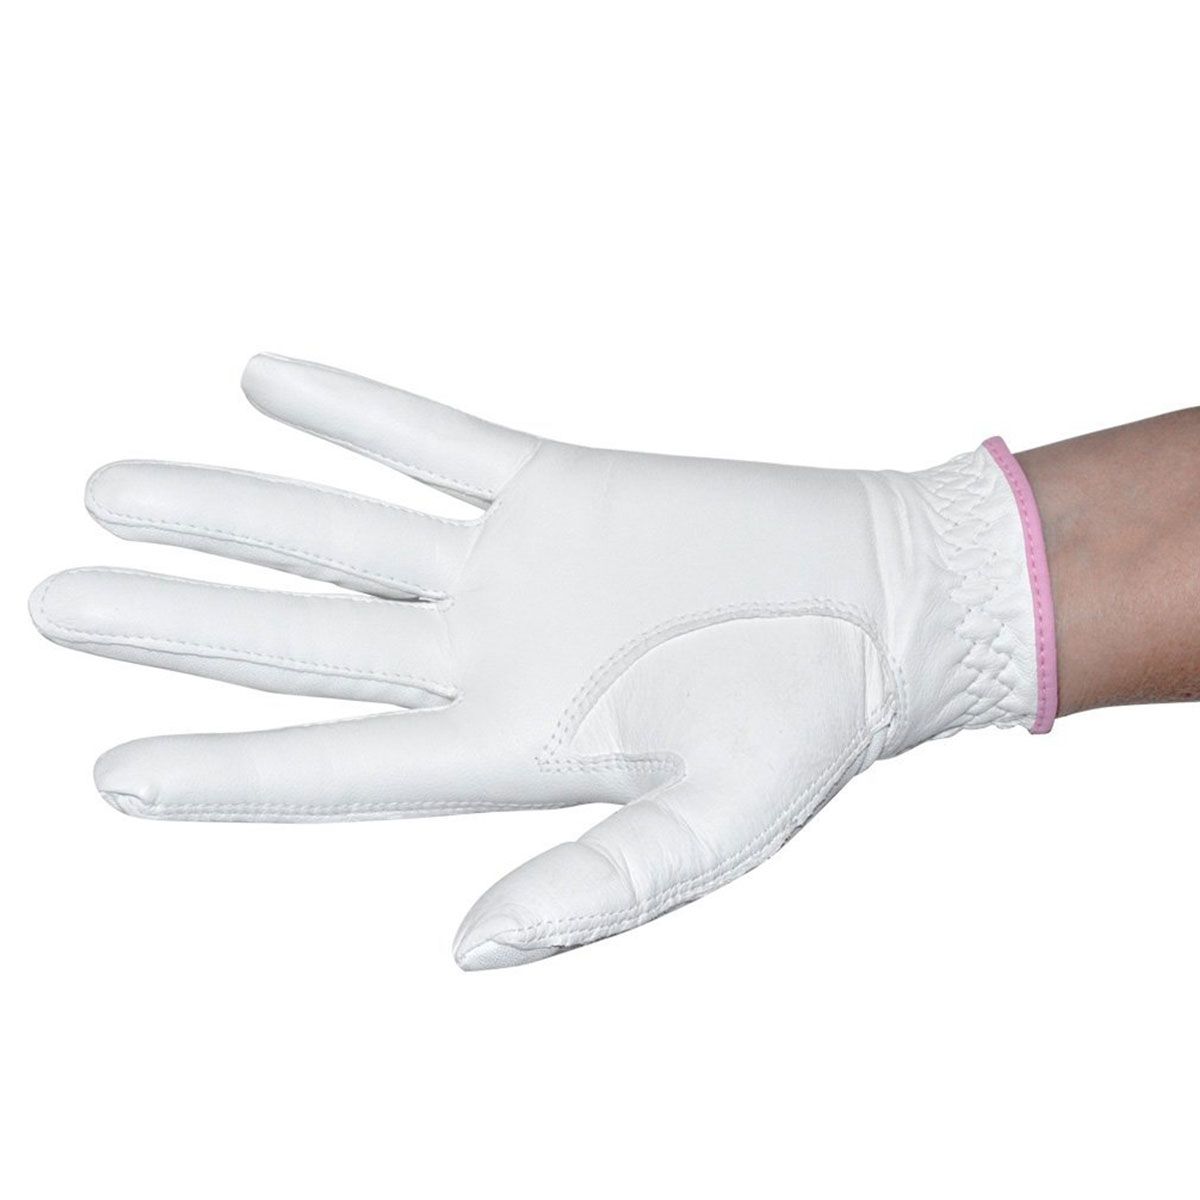 palm view of an Intech Women's Cabretta Leather Golf Glove that a person has on their left hand